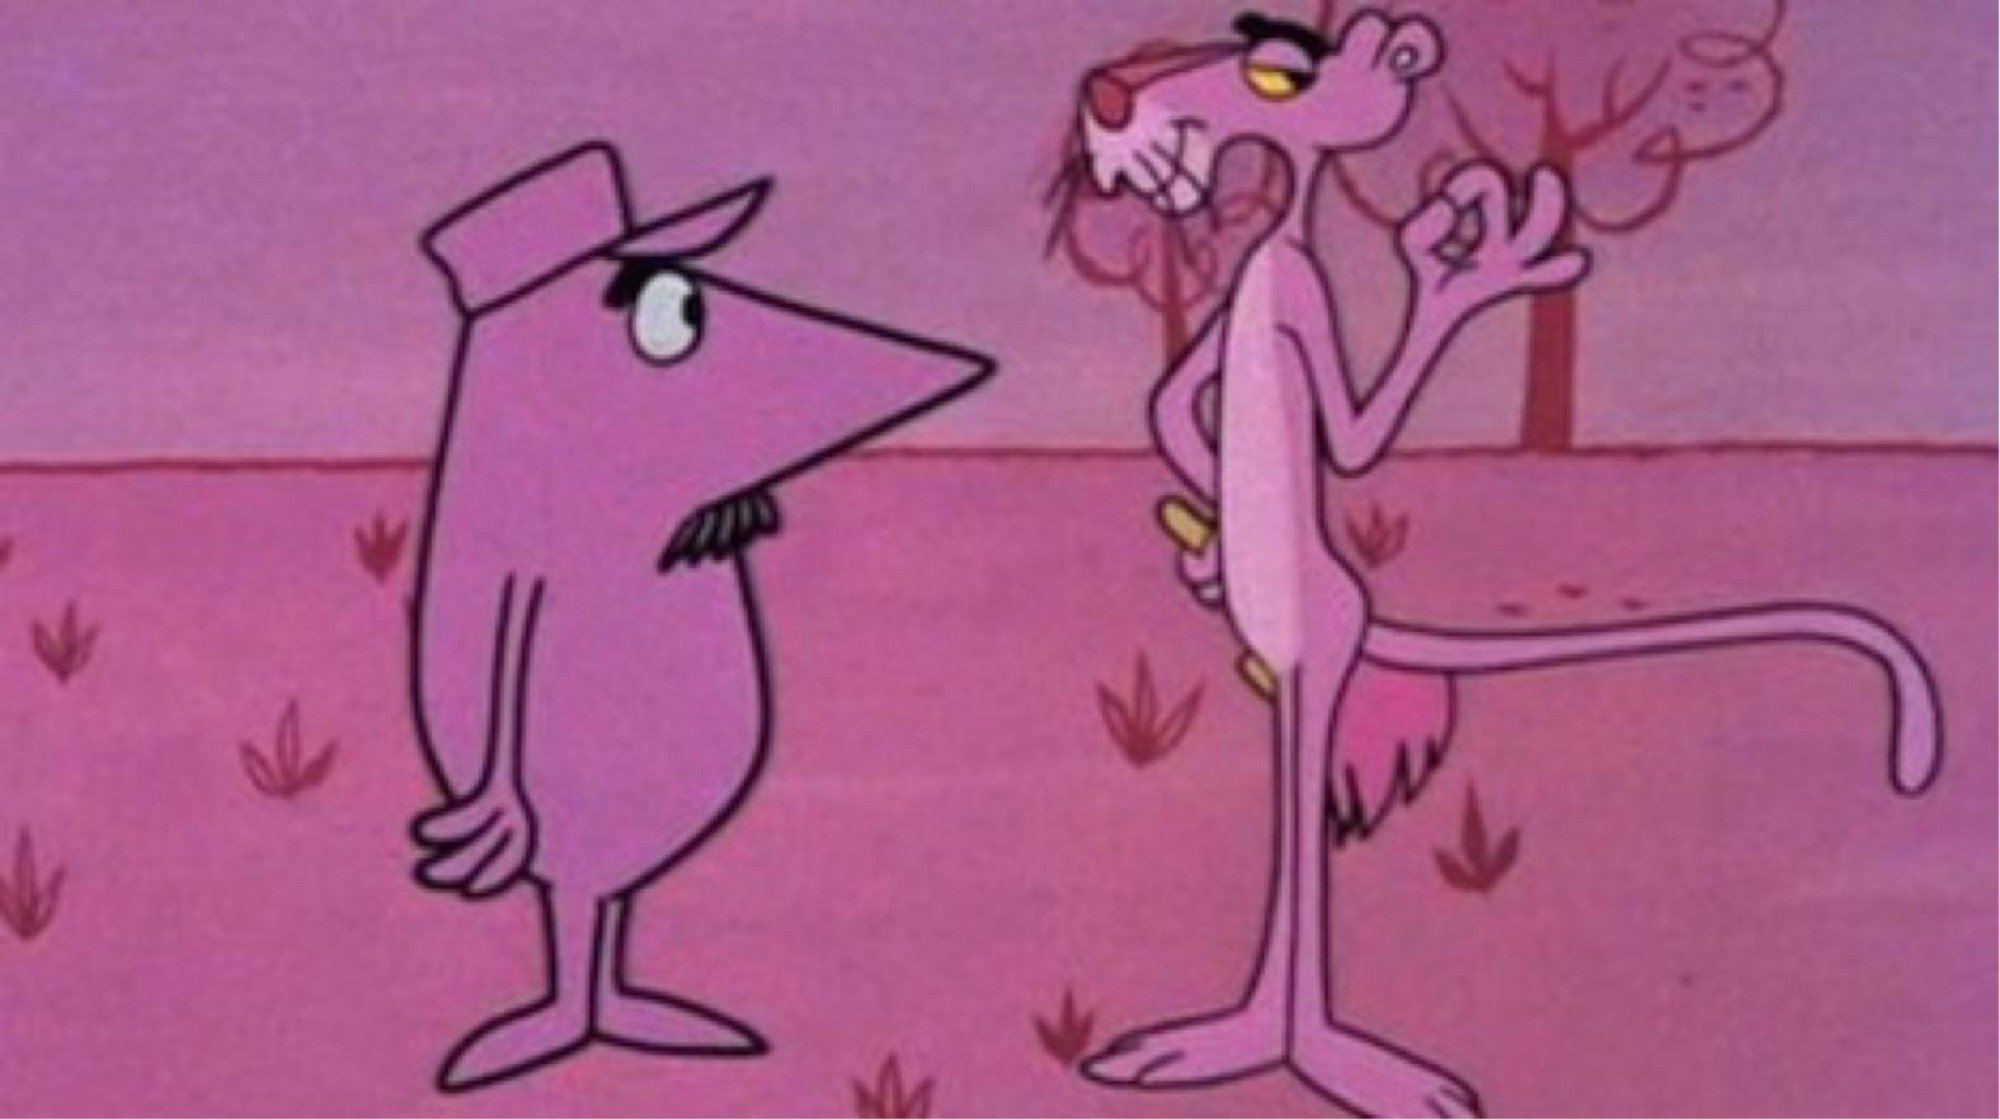 Why 'The Pink Panther' Season 1 Episode 1's History-Breaking Oscar Win Rocks